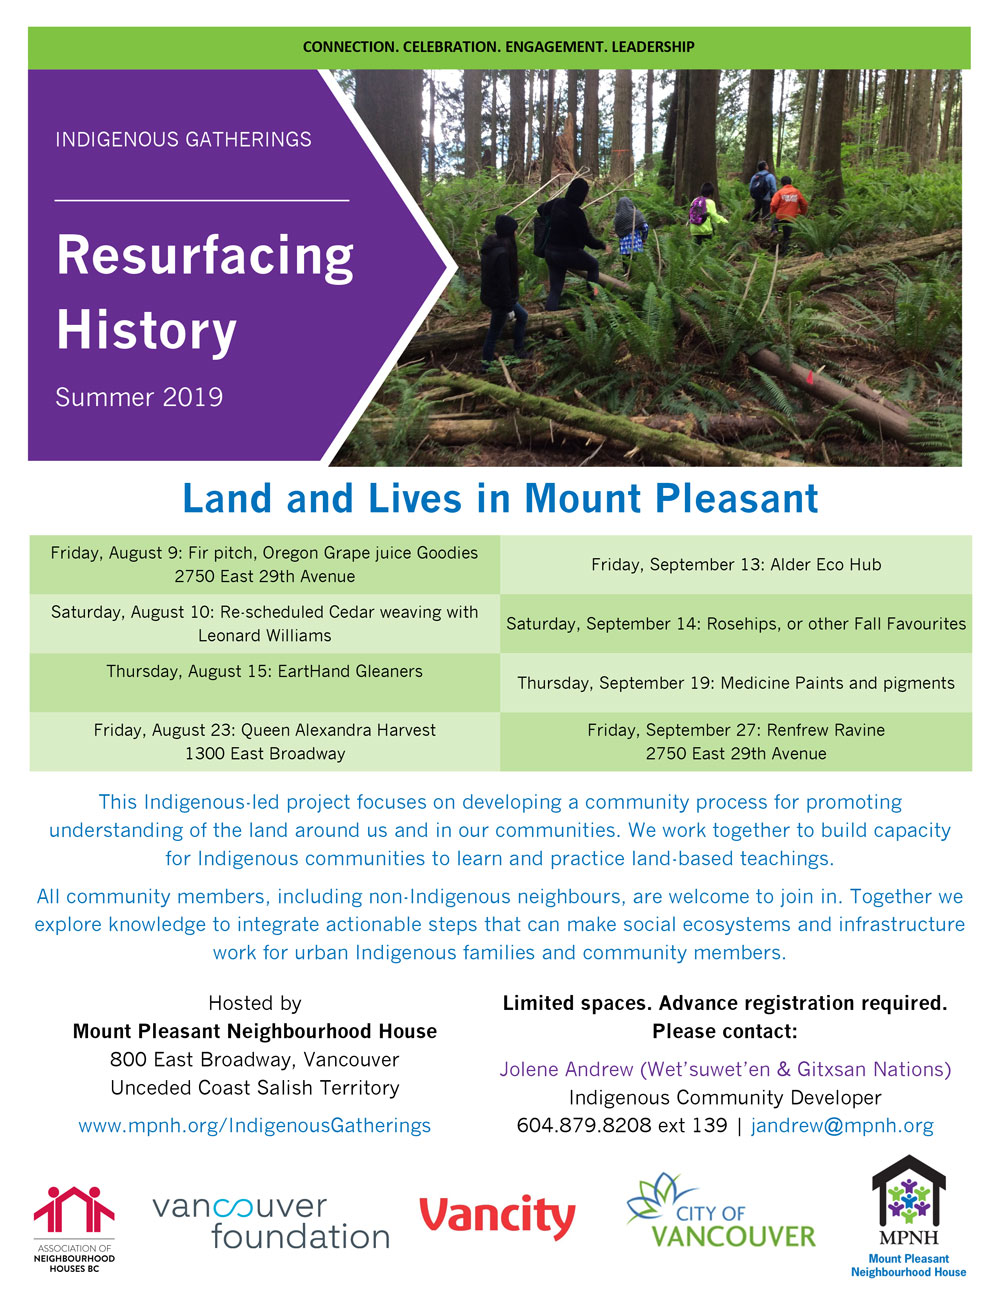 An image of the program poster with event details, featuring a photo of people hiking in the forest, among sword ferns.